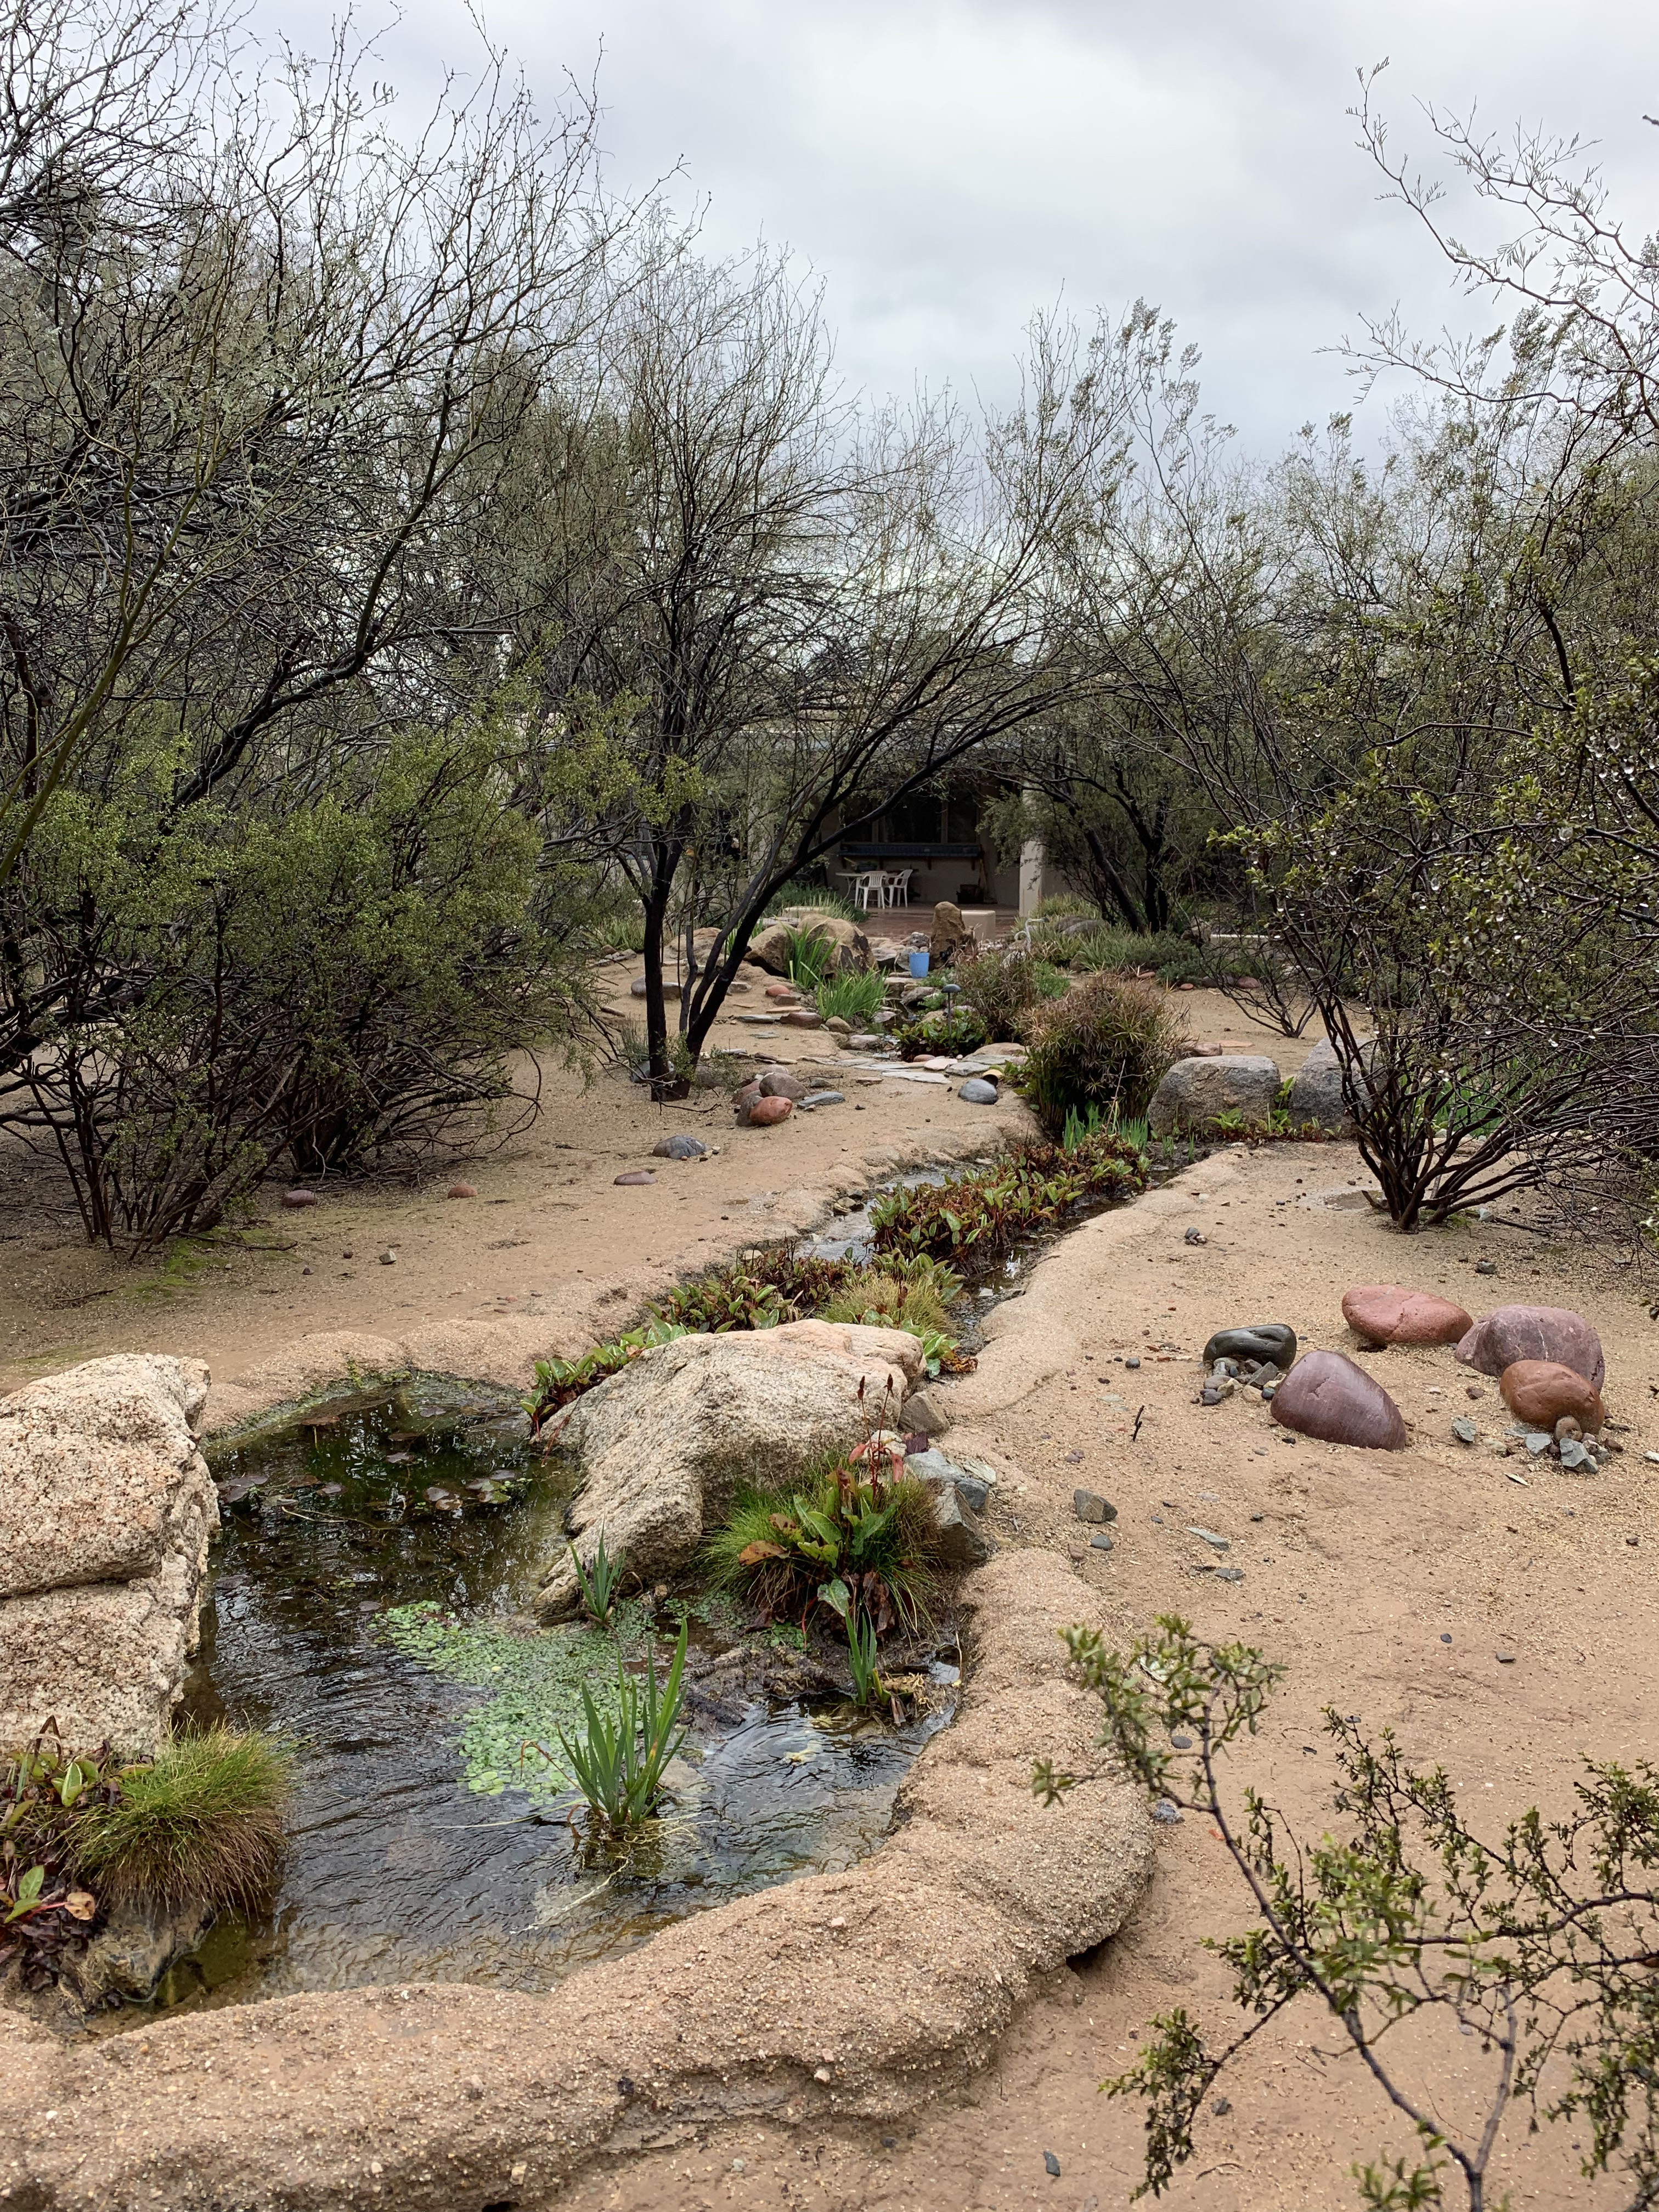 A series of small ponds connected by flowing water in a desert garden